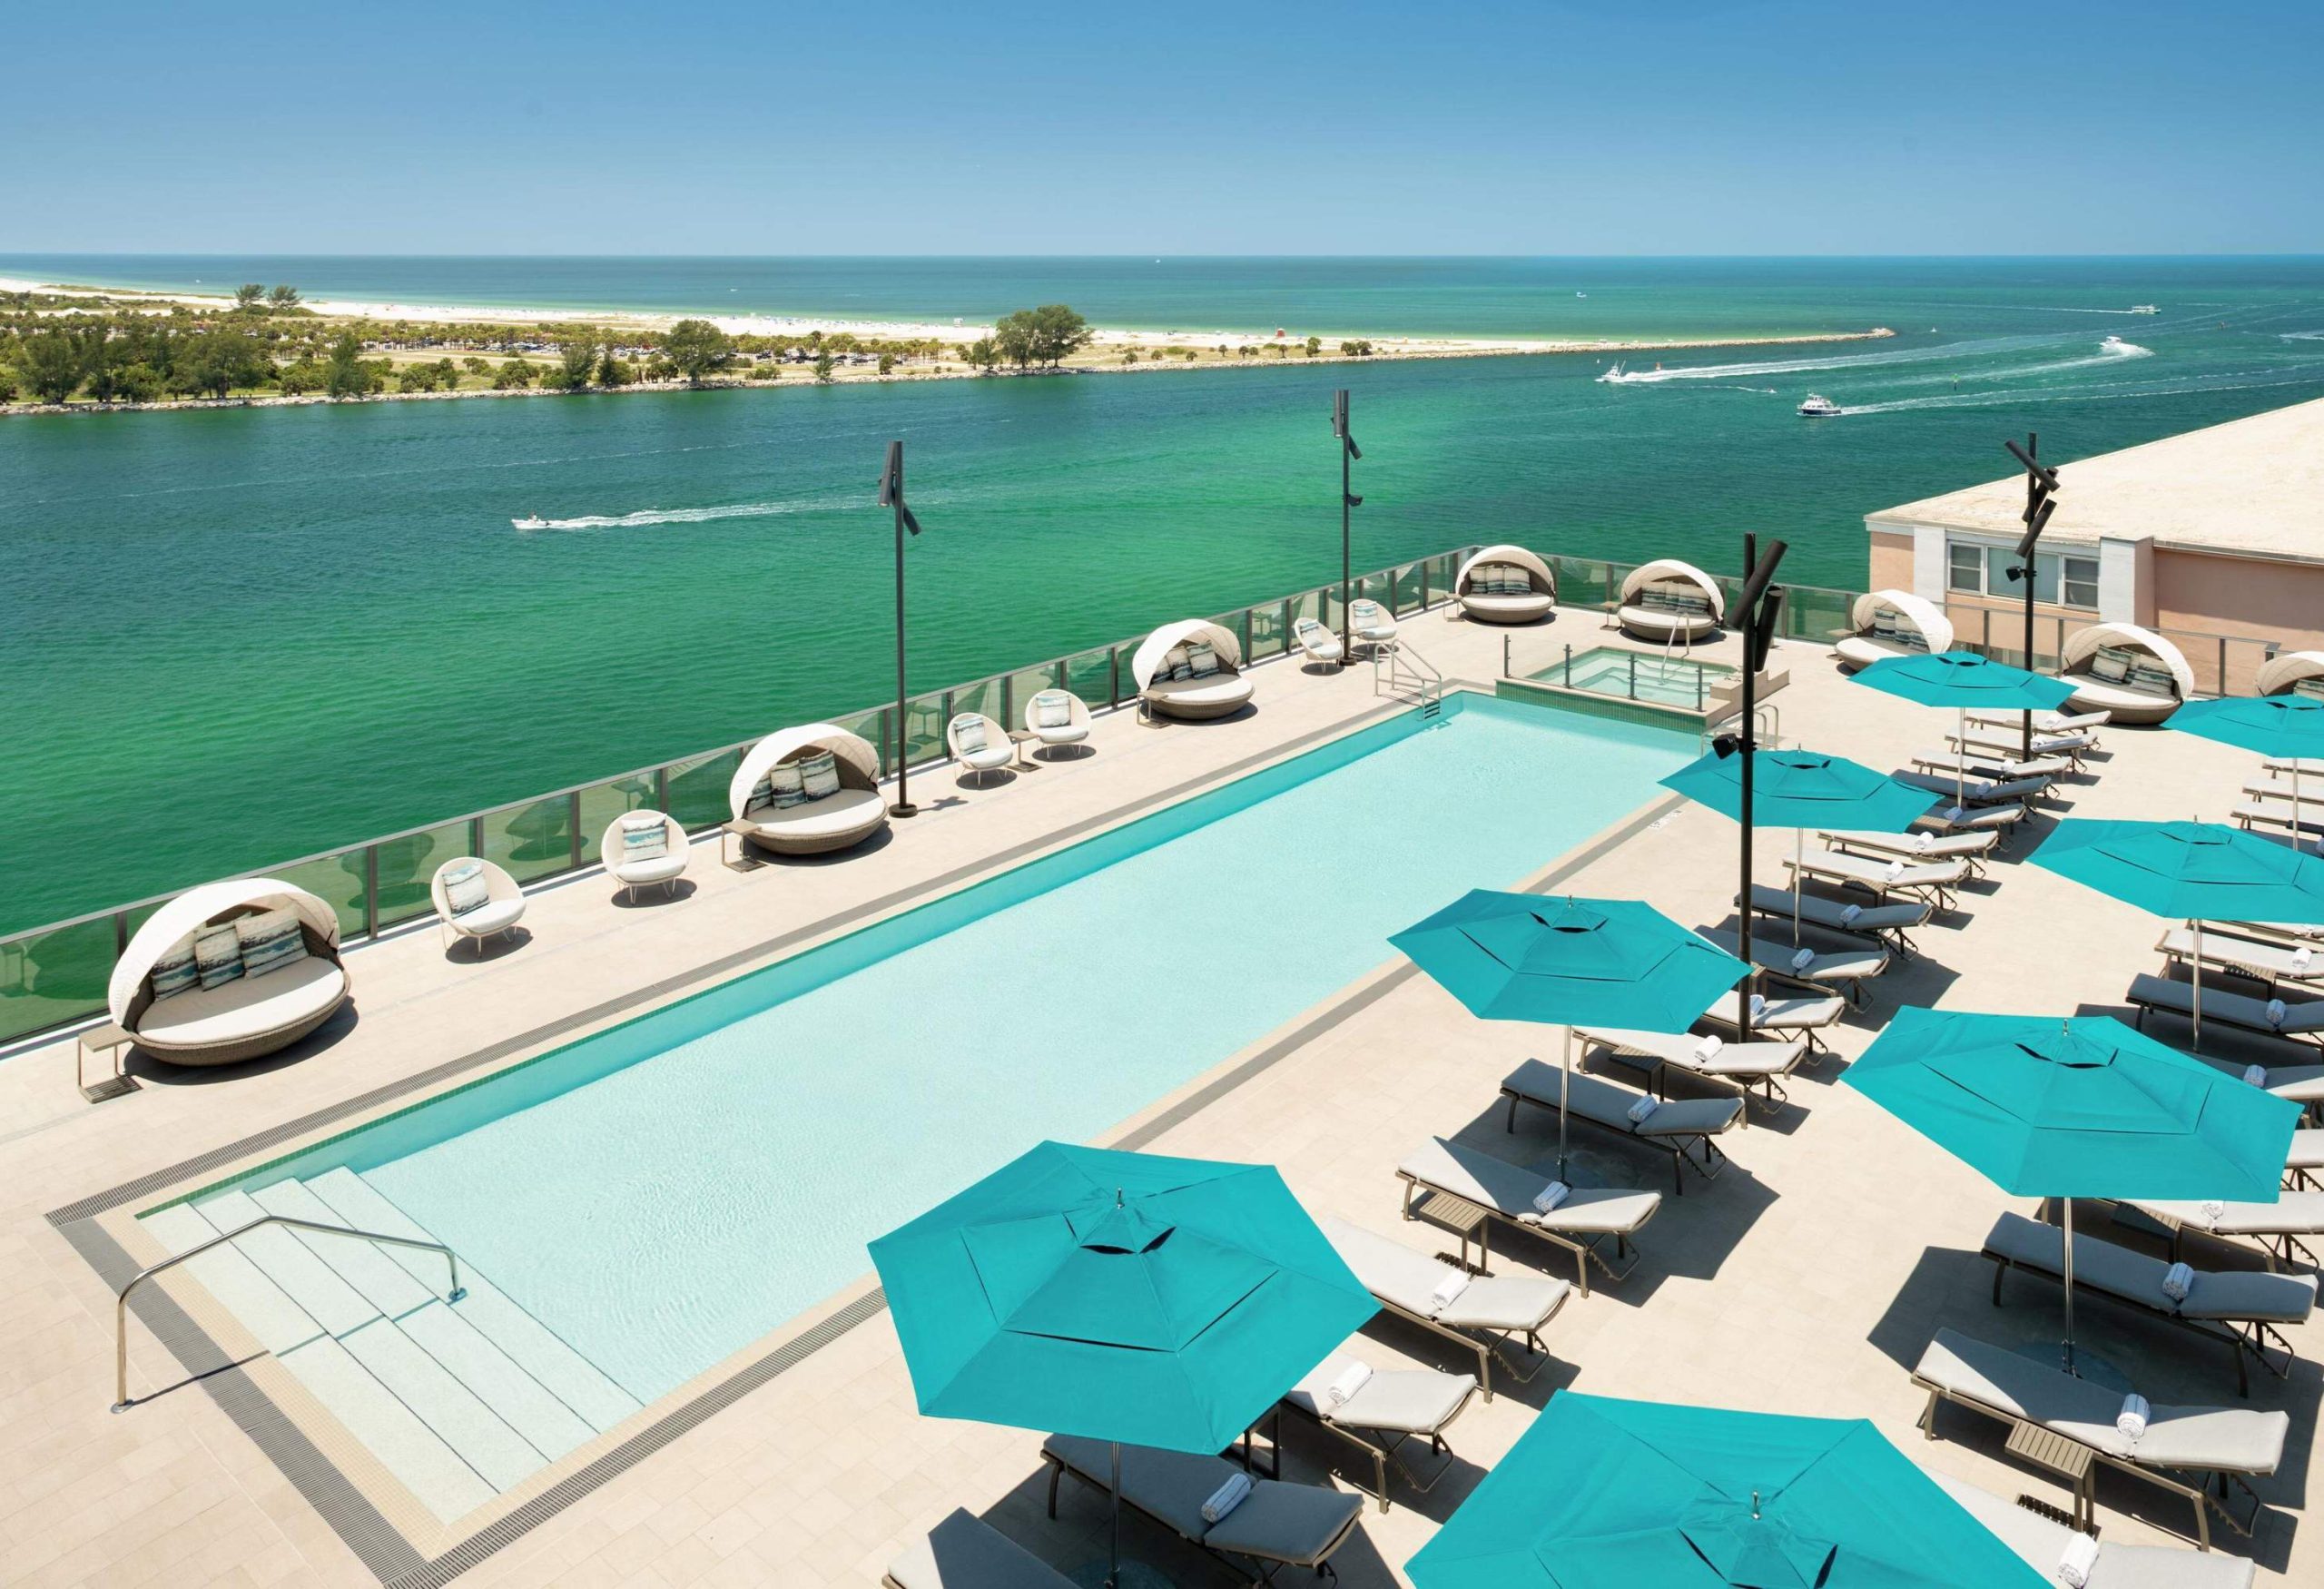 Luxury hotel swimming pool with sun loungers and sun umbrellas overlooking the sea